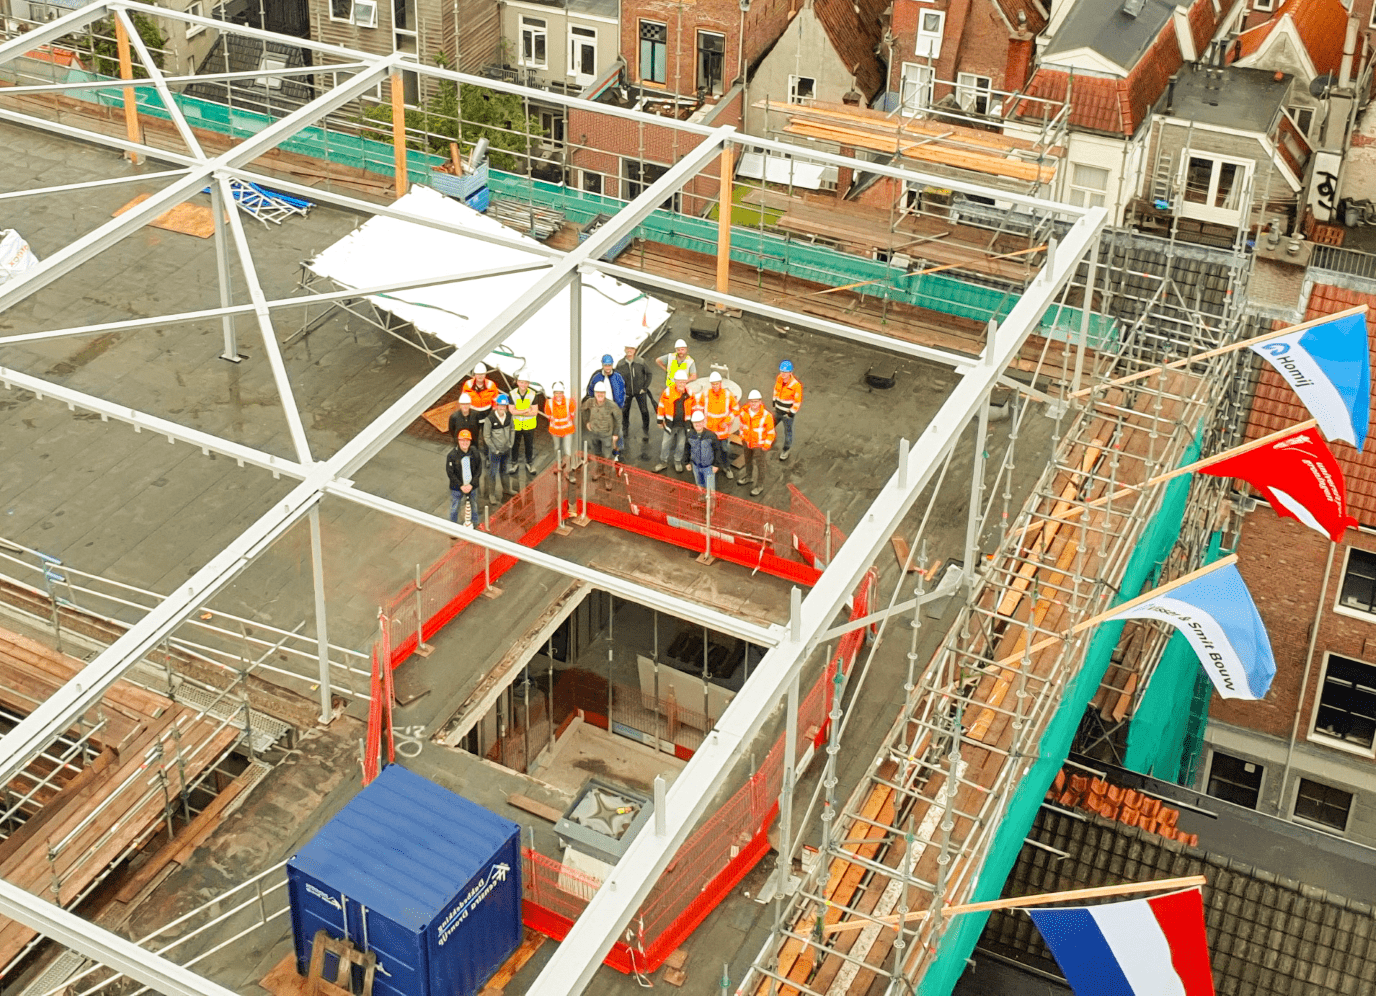 The highest point has been reached with the installation of the steel structure